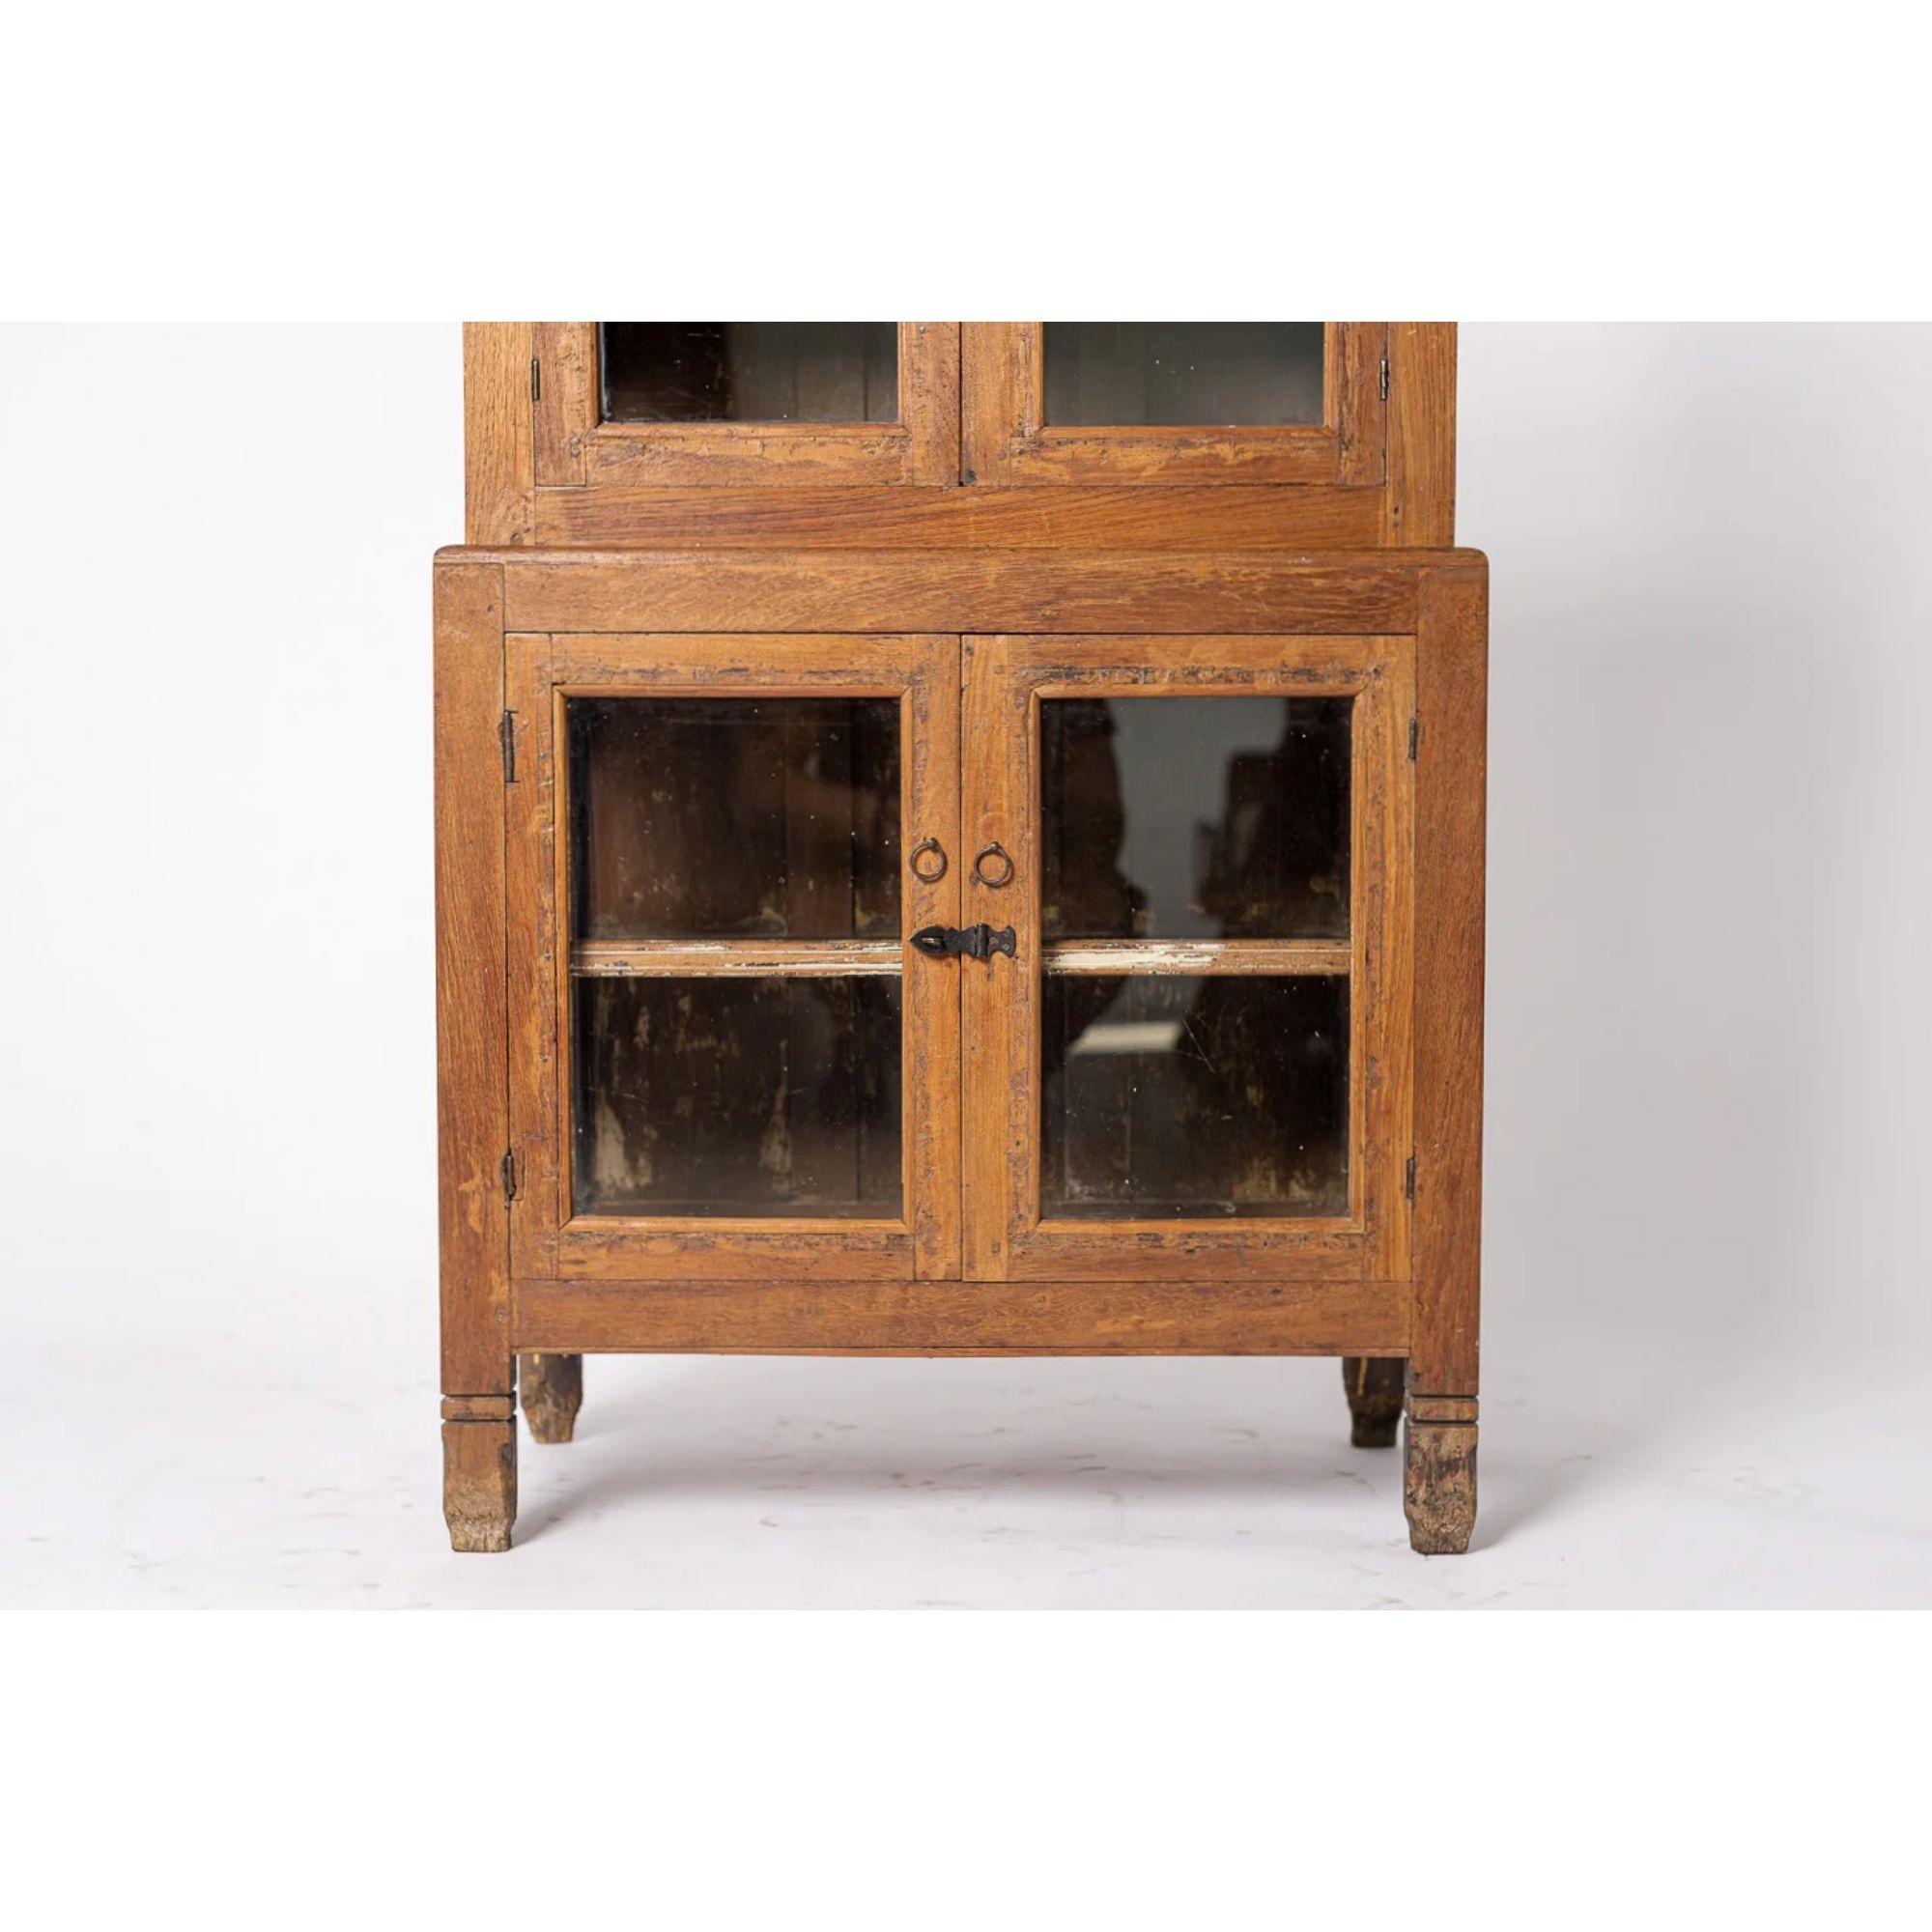 Antique Portuguese Storage Cupboard Display Cabinet in Wood & Glass In Good Condition For Sale In Detroit, MI